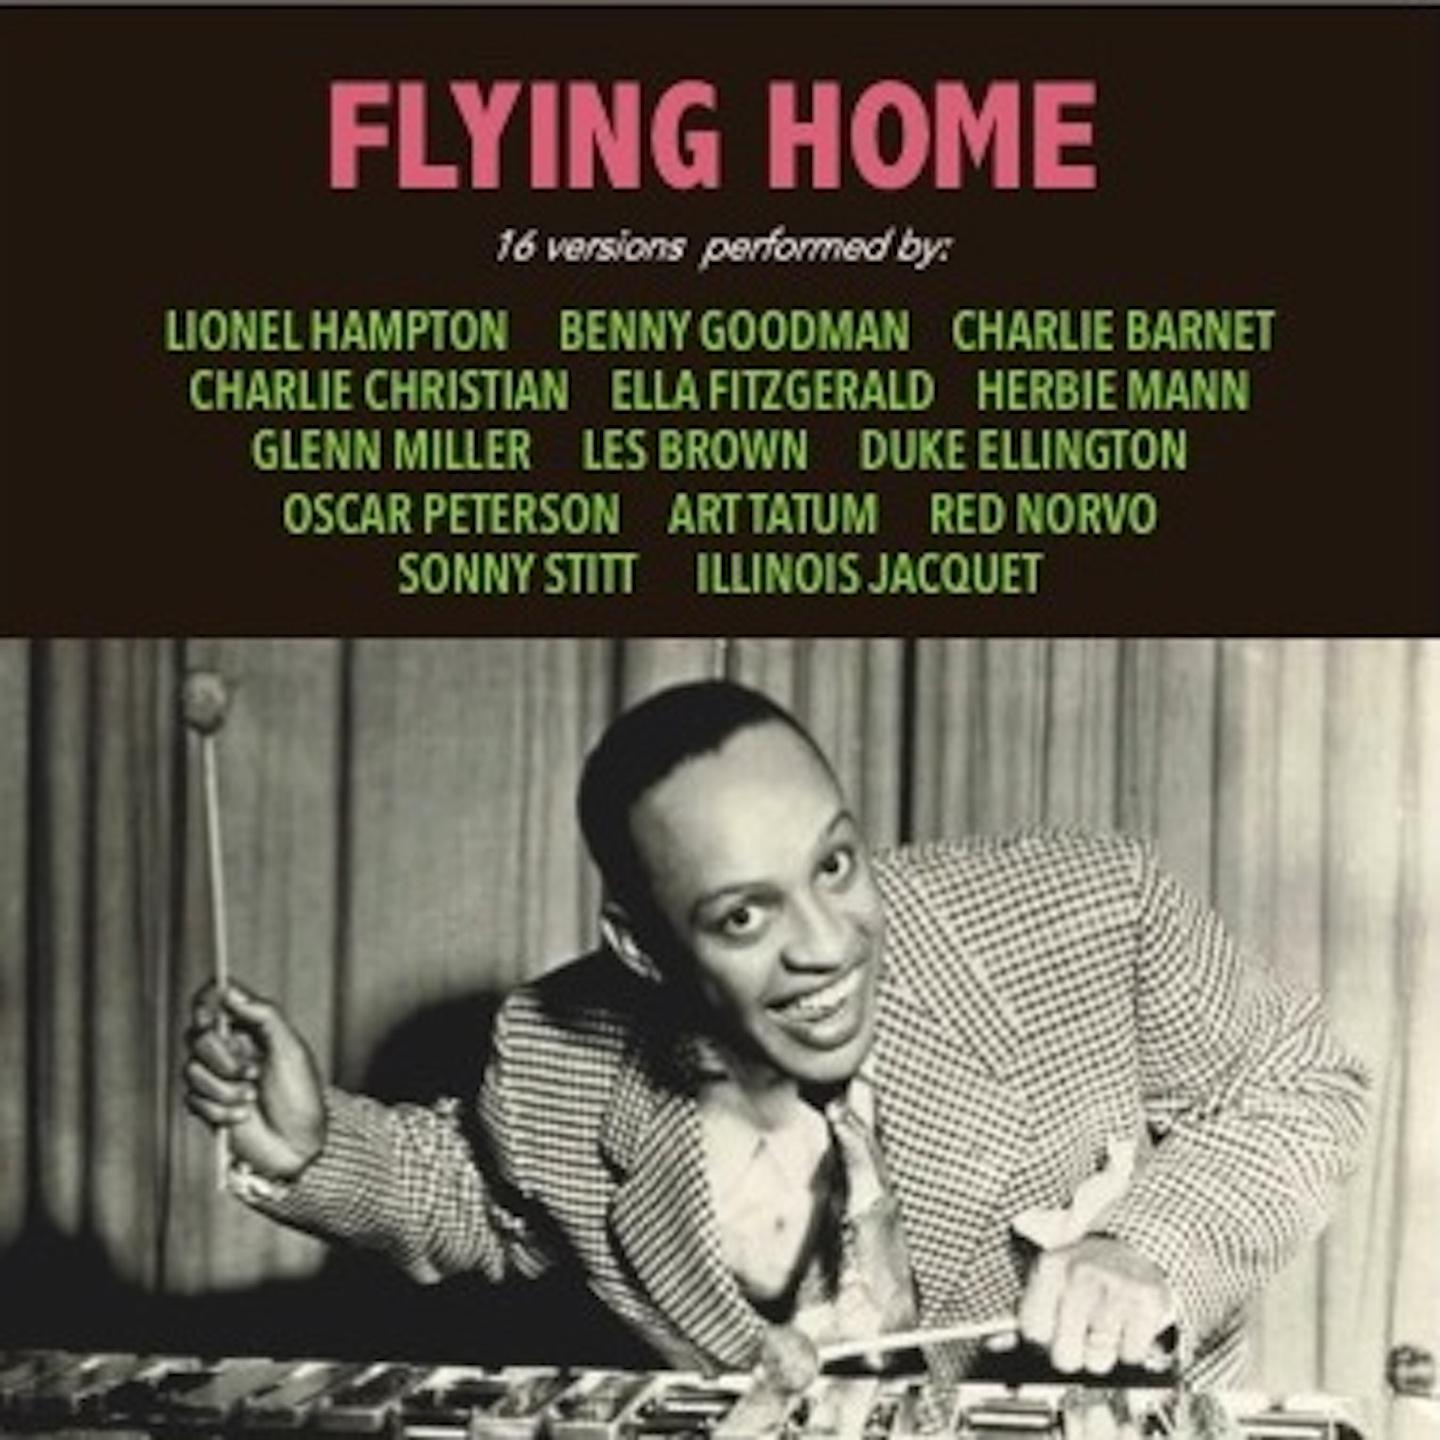 Flying Home (16 Versions Performed By:)